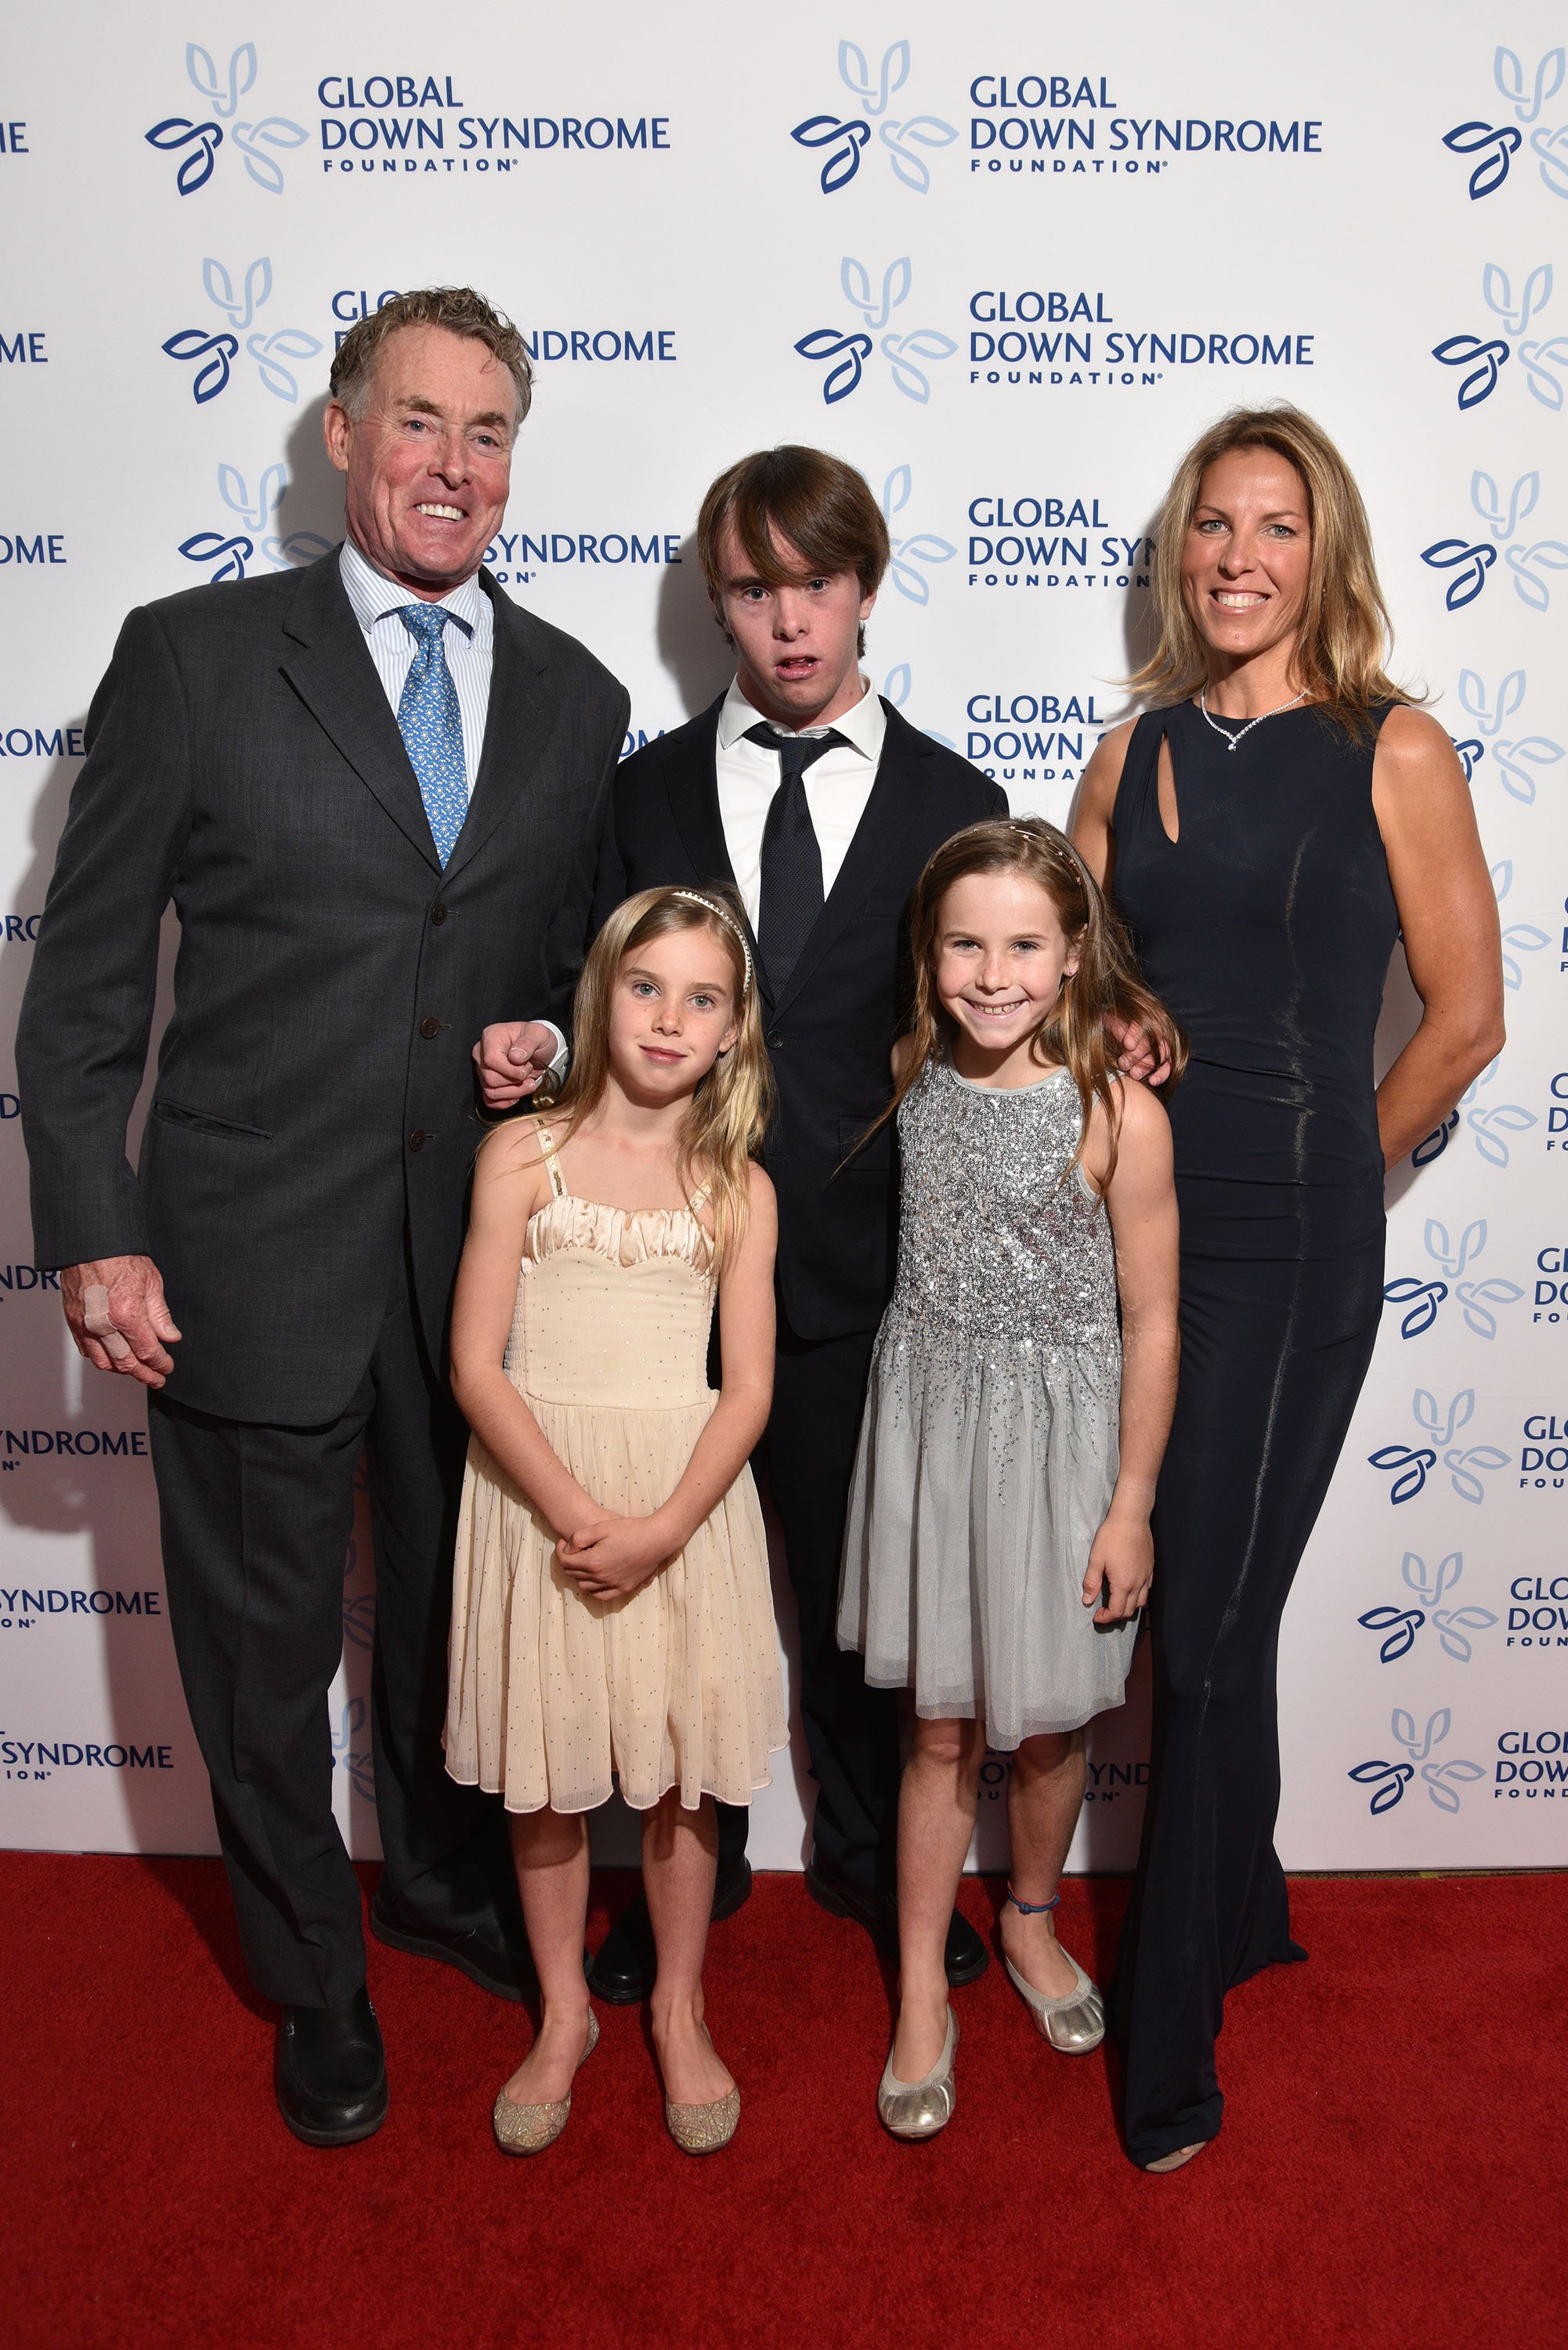 John C McGinley with Kate, Max, Billie Grace, and wife Nichole at Sheraton Denver Downtown Hotel on November 11, 2017, in Denver, Colorado. I Source: Getty Images